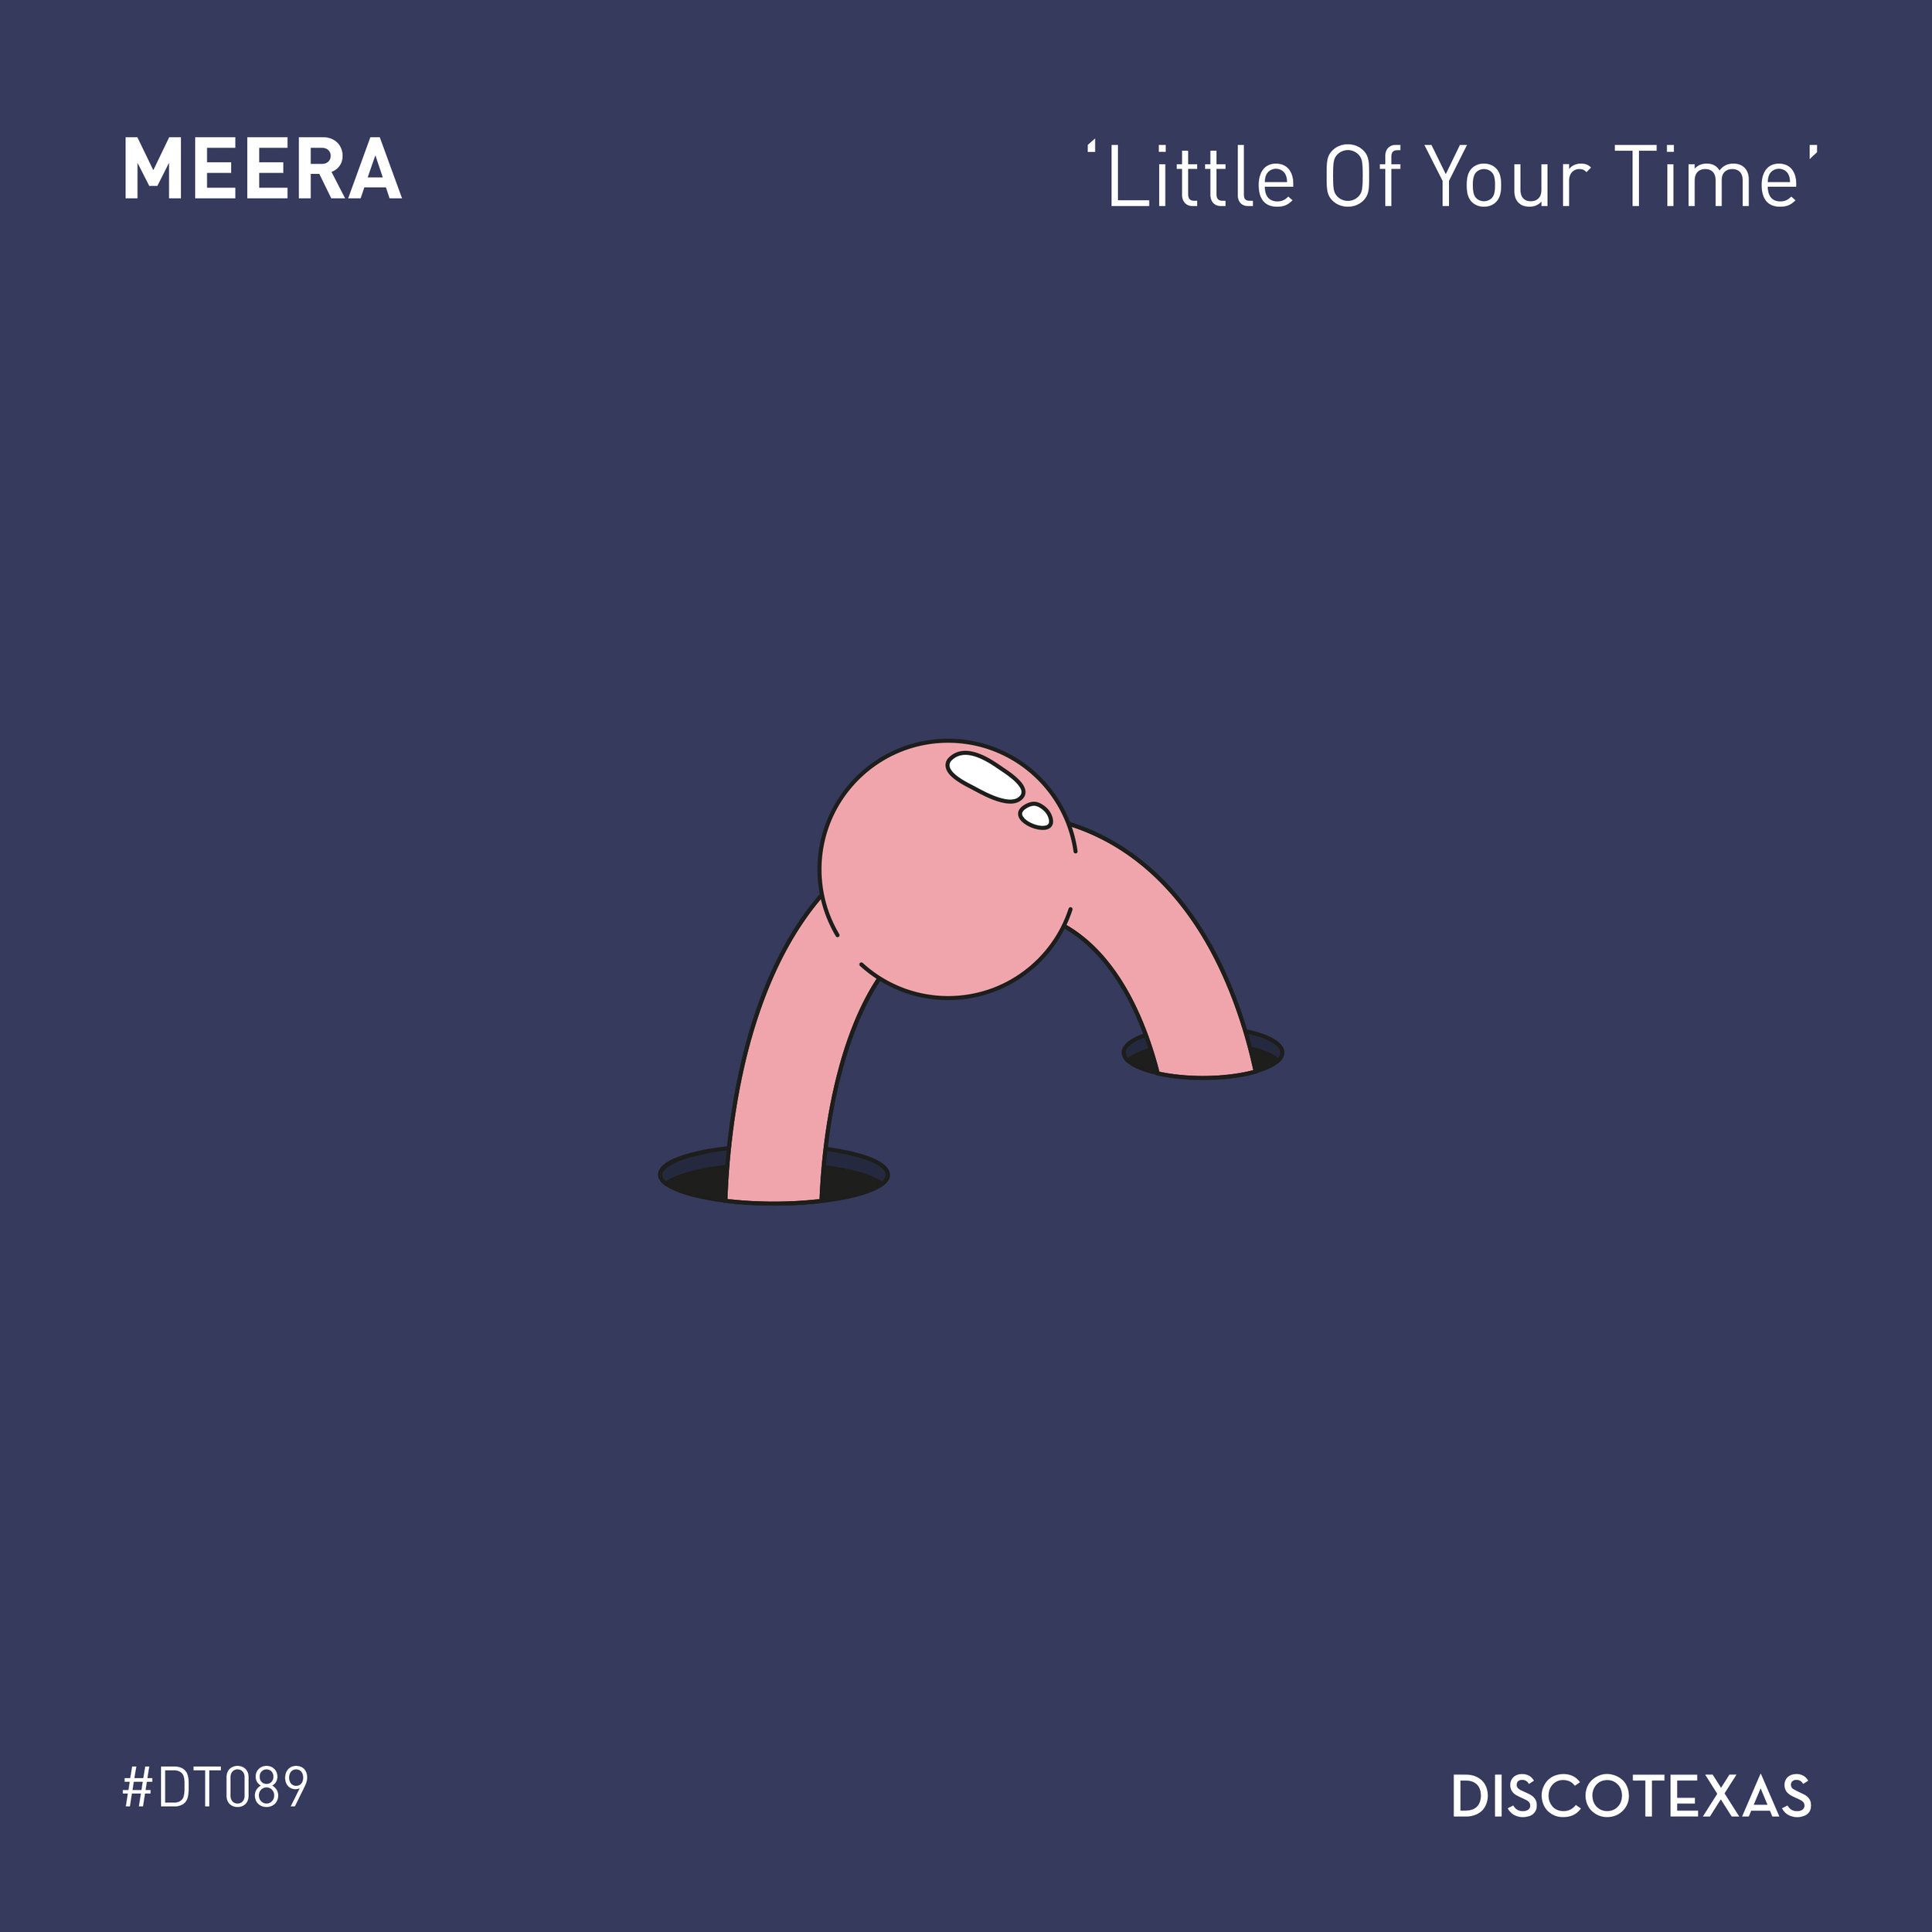 DT089: MEERA - Little Of Your Time